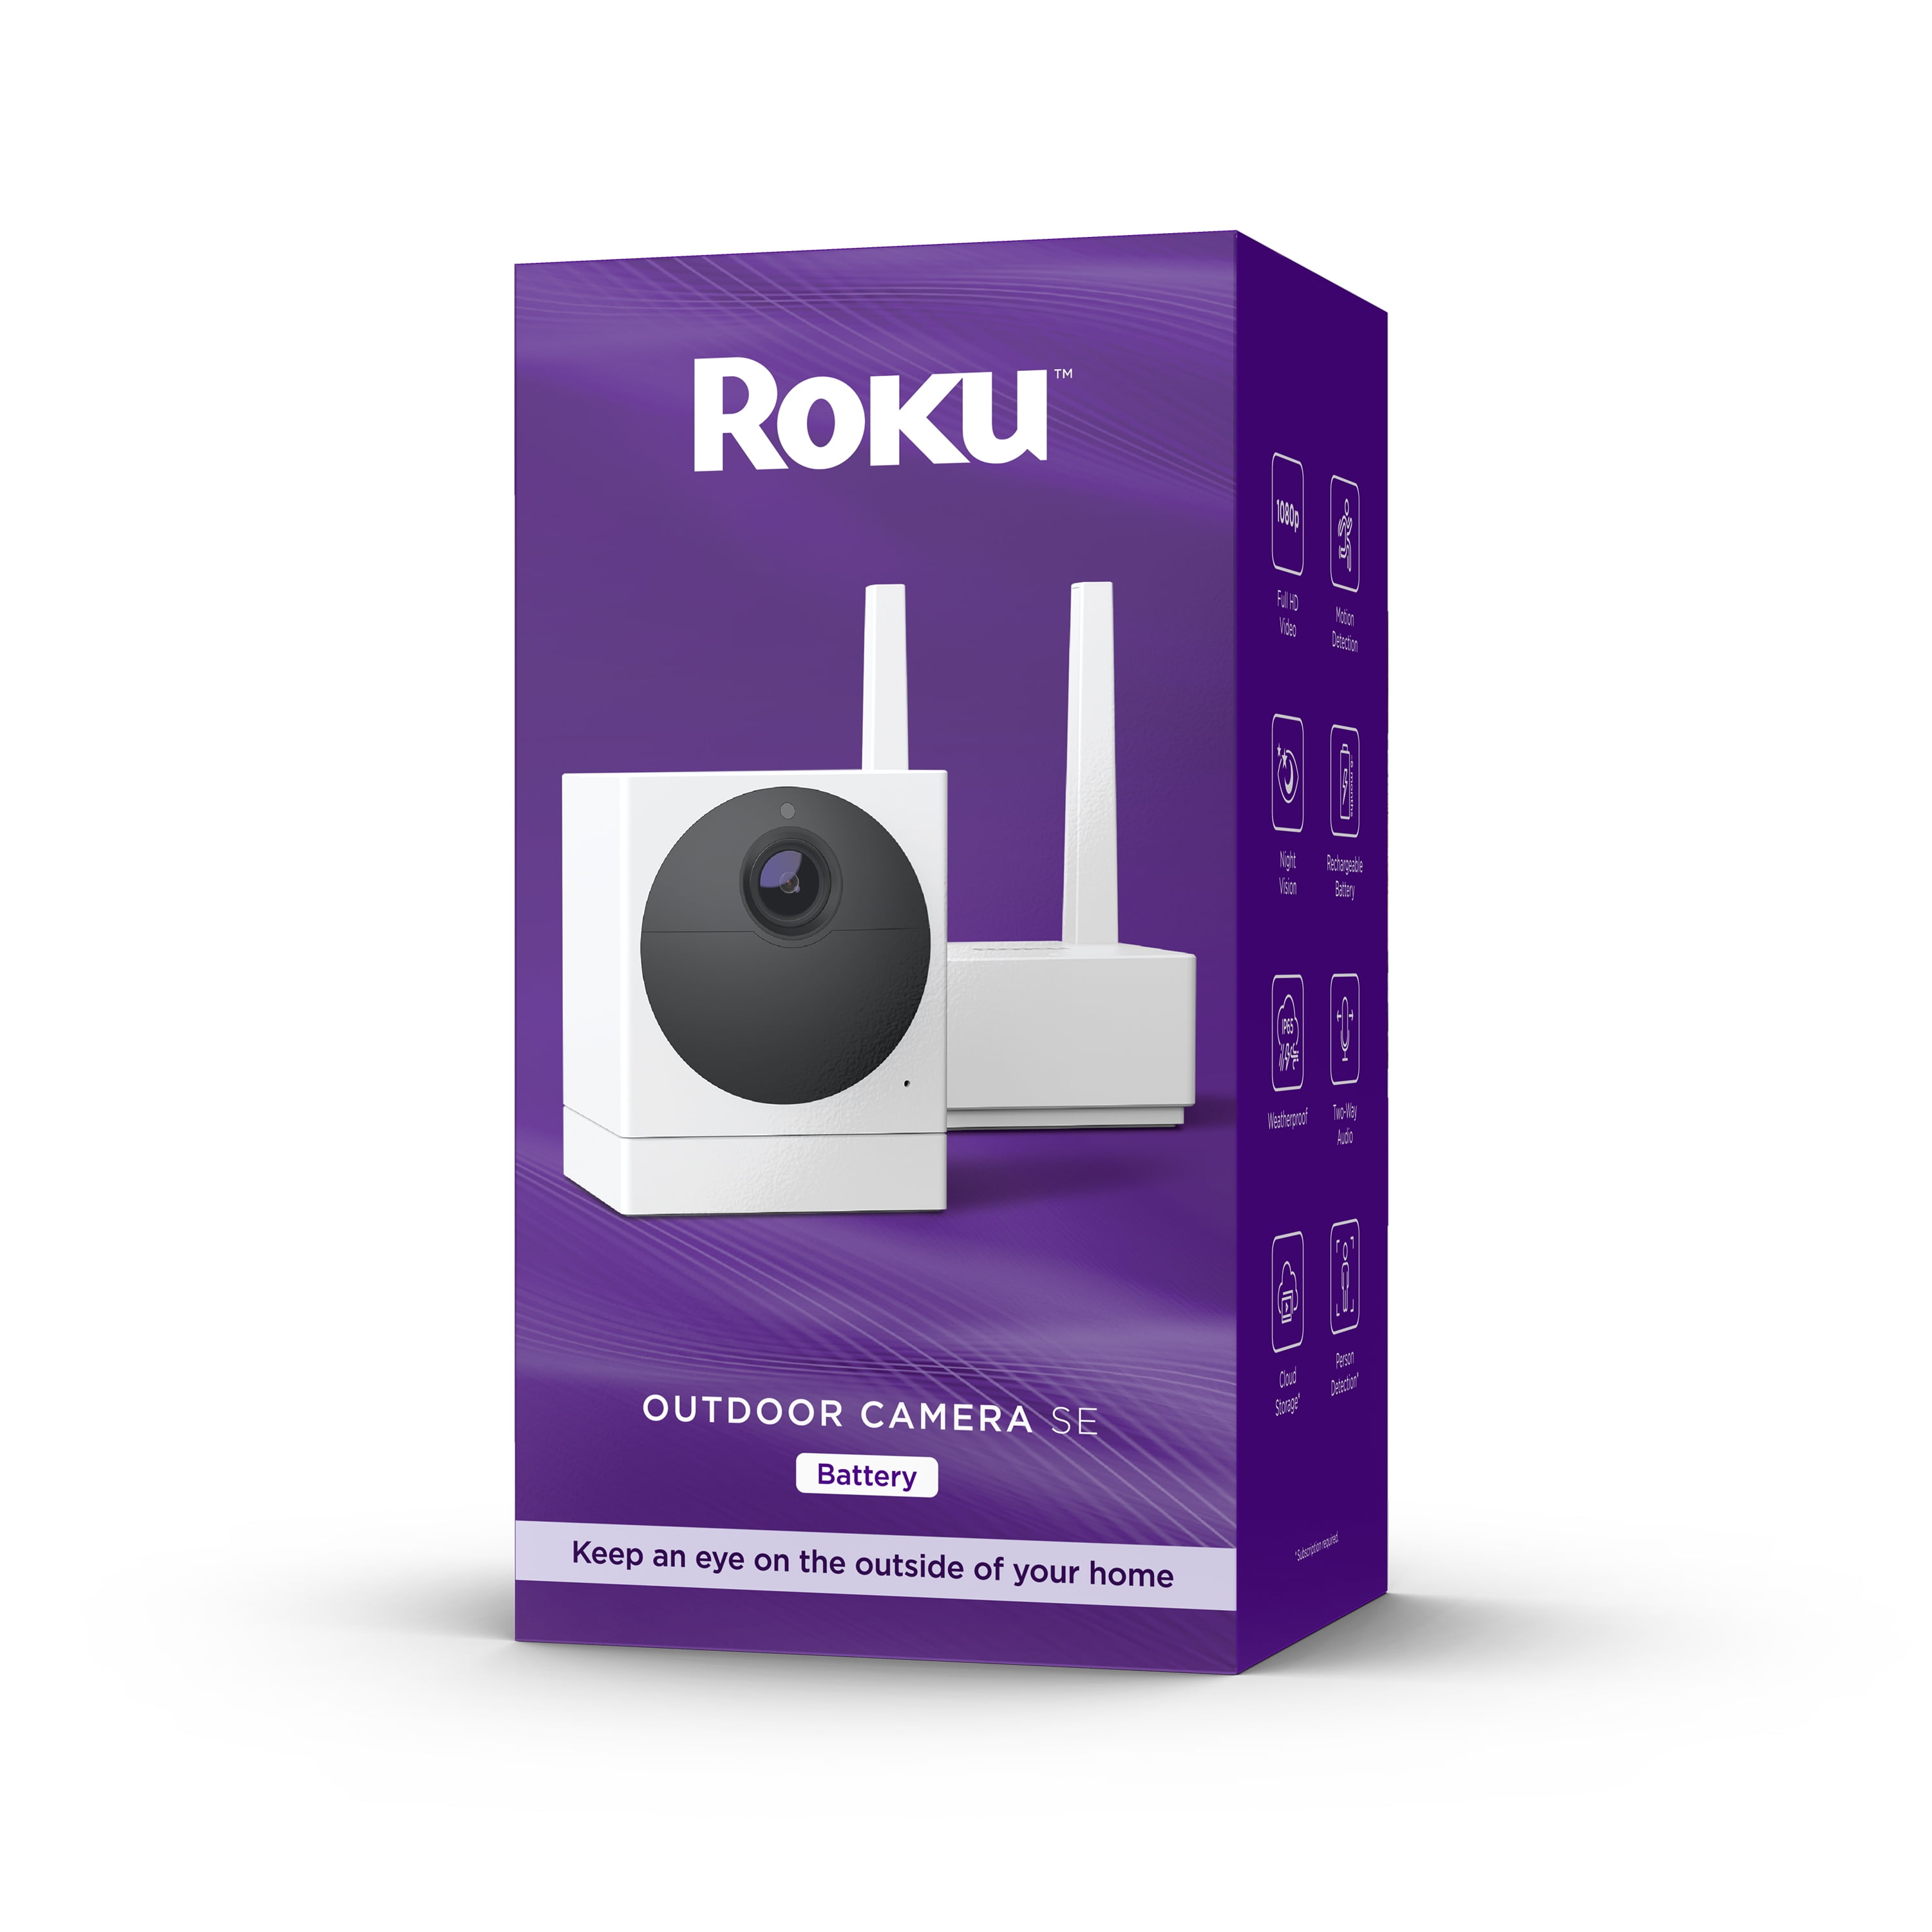 Roku Smart Home Outdoor Camera SE Wi-Fi-Connected Security Surveillance Camera with Motion Detection, Remote Monitoring, and Long-Lasting Battery